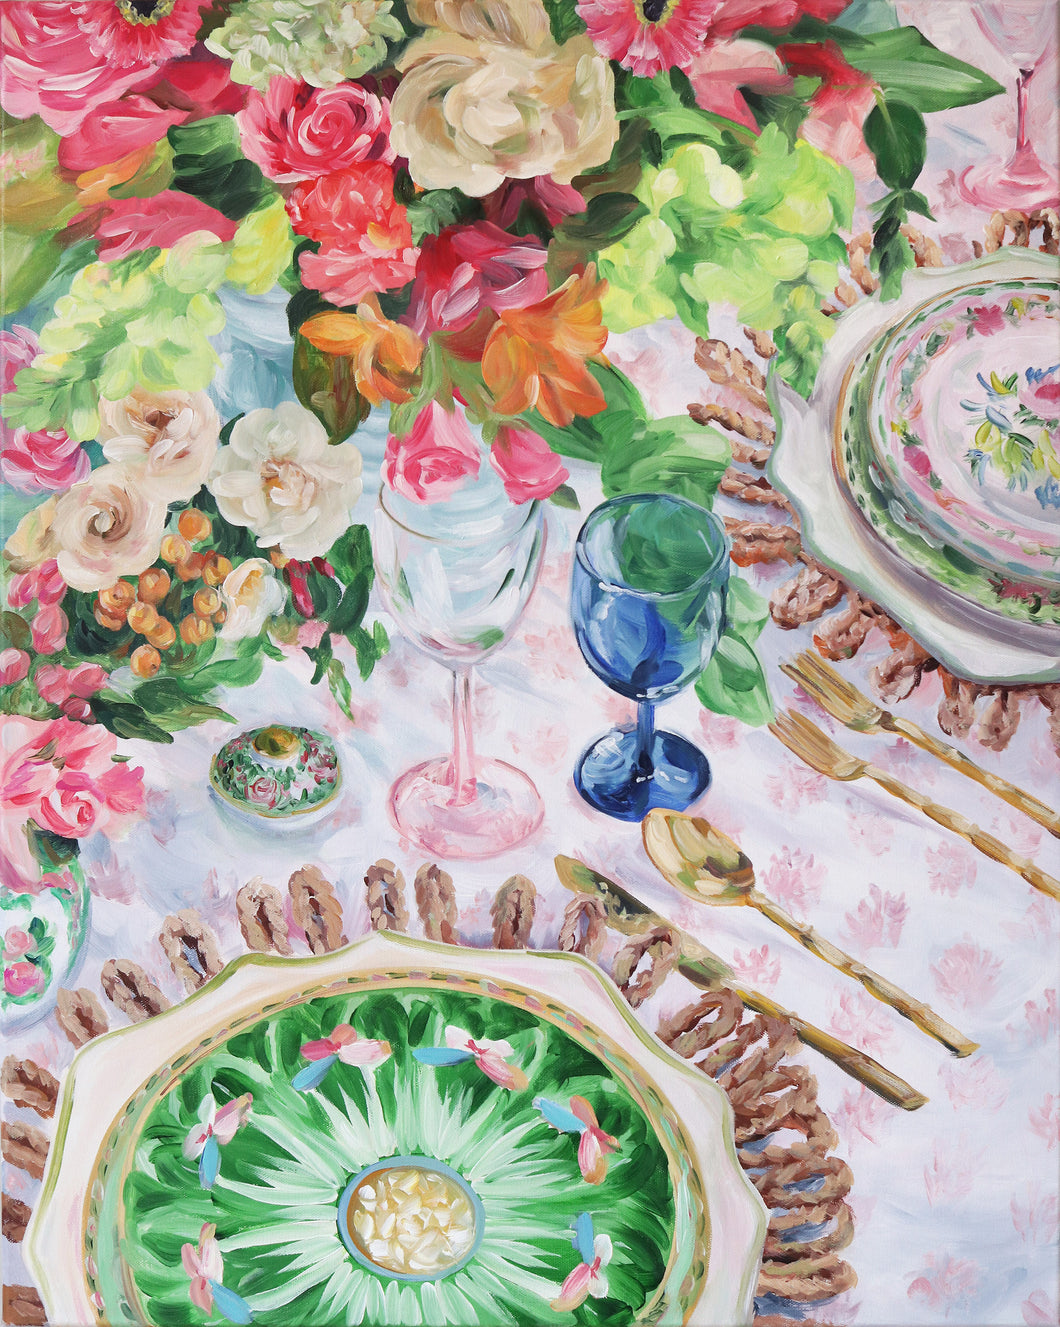 Elizabeth Alice Studio original acrylic painting art, lush tablescape with famille rose chinoiserie plates, clear pink blue wine glasses, pink and green floral bouquet centerpiece. Colorful painting for dining room, unique art for dining room, add pop of color to neutral room. Chinoiserie art, original painting, expressive brush strokes, impressionist modern painting, unique art for dining room. Colorful art for traditional home.